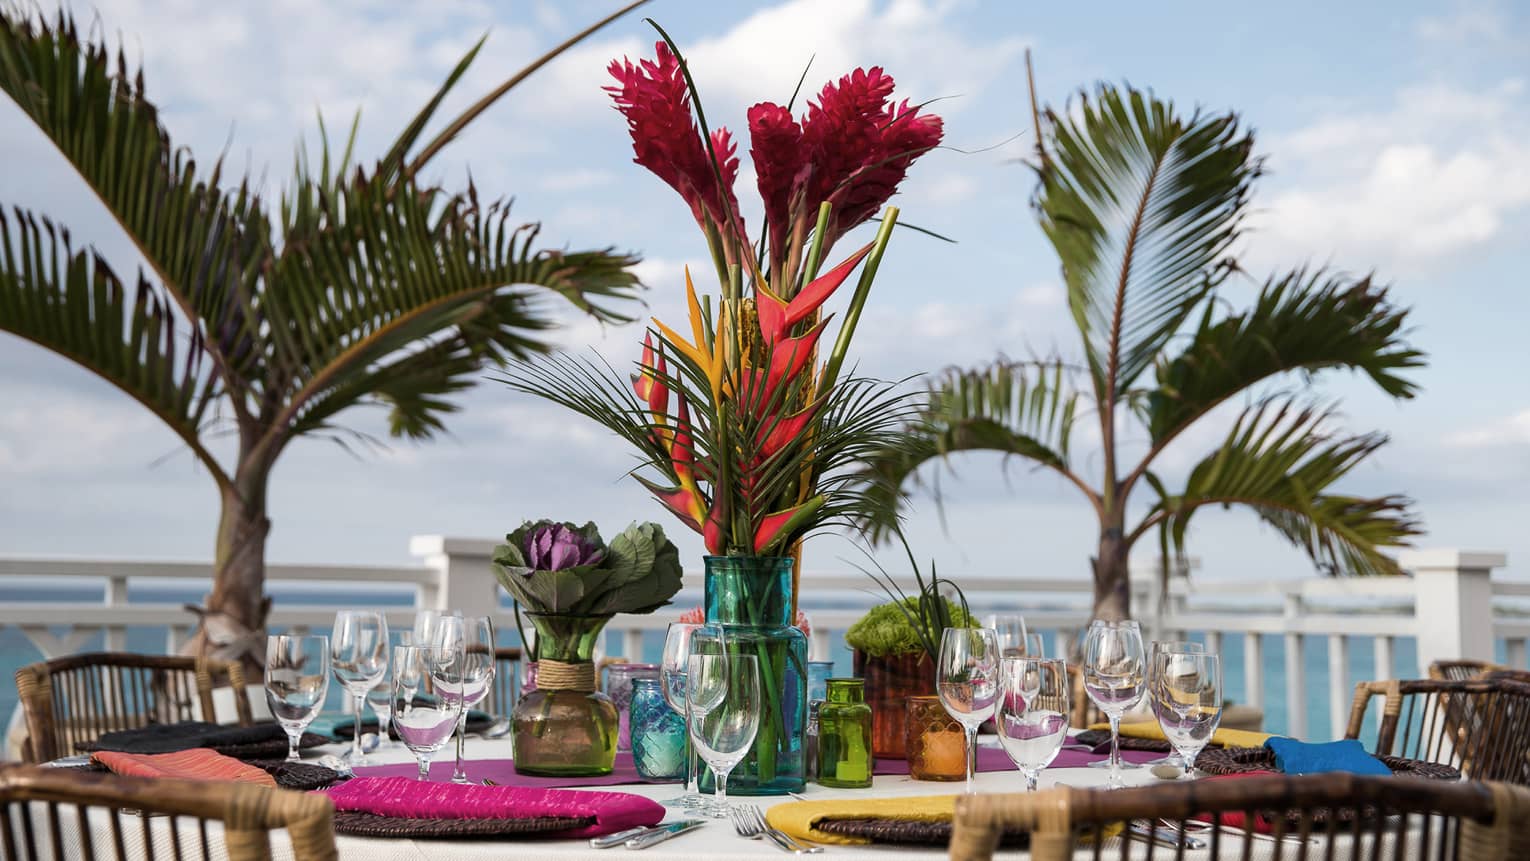 Brightly colored place settings and flowers adorn a a table, outside beside palm trees